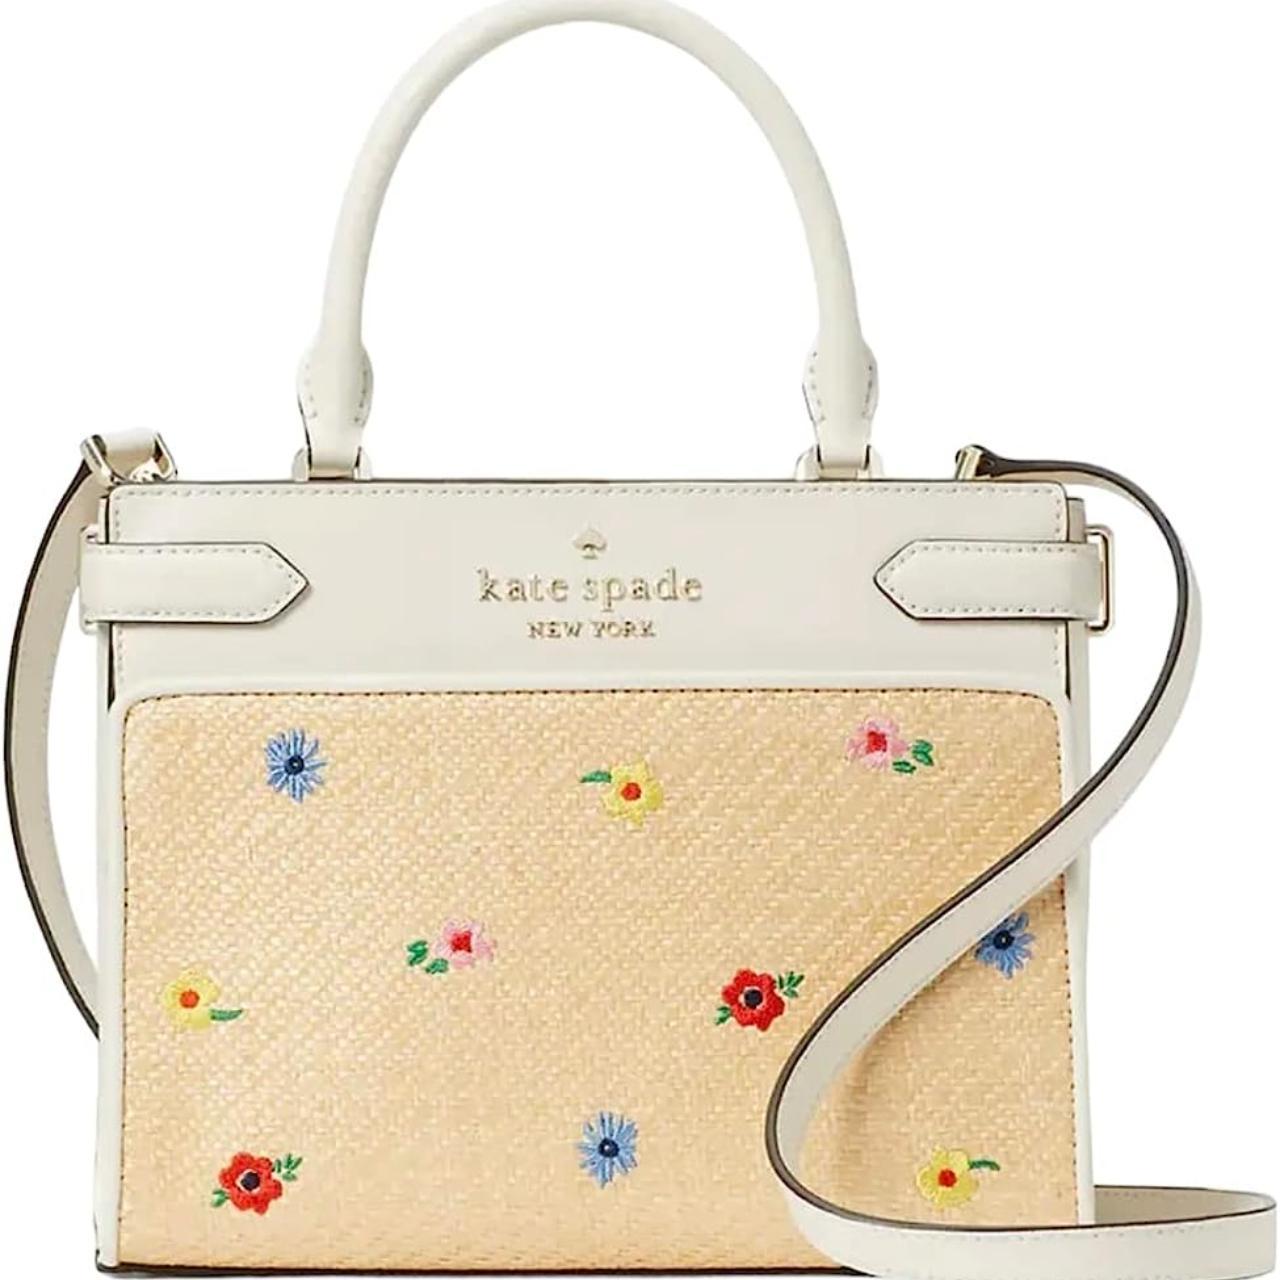  Kate Spade New York Staci Small Saffiano Leather